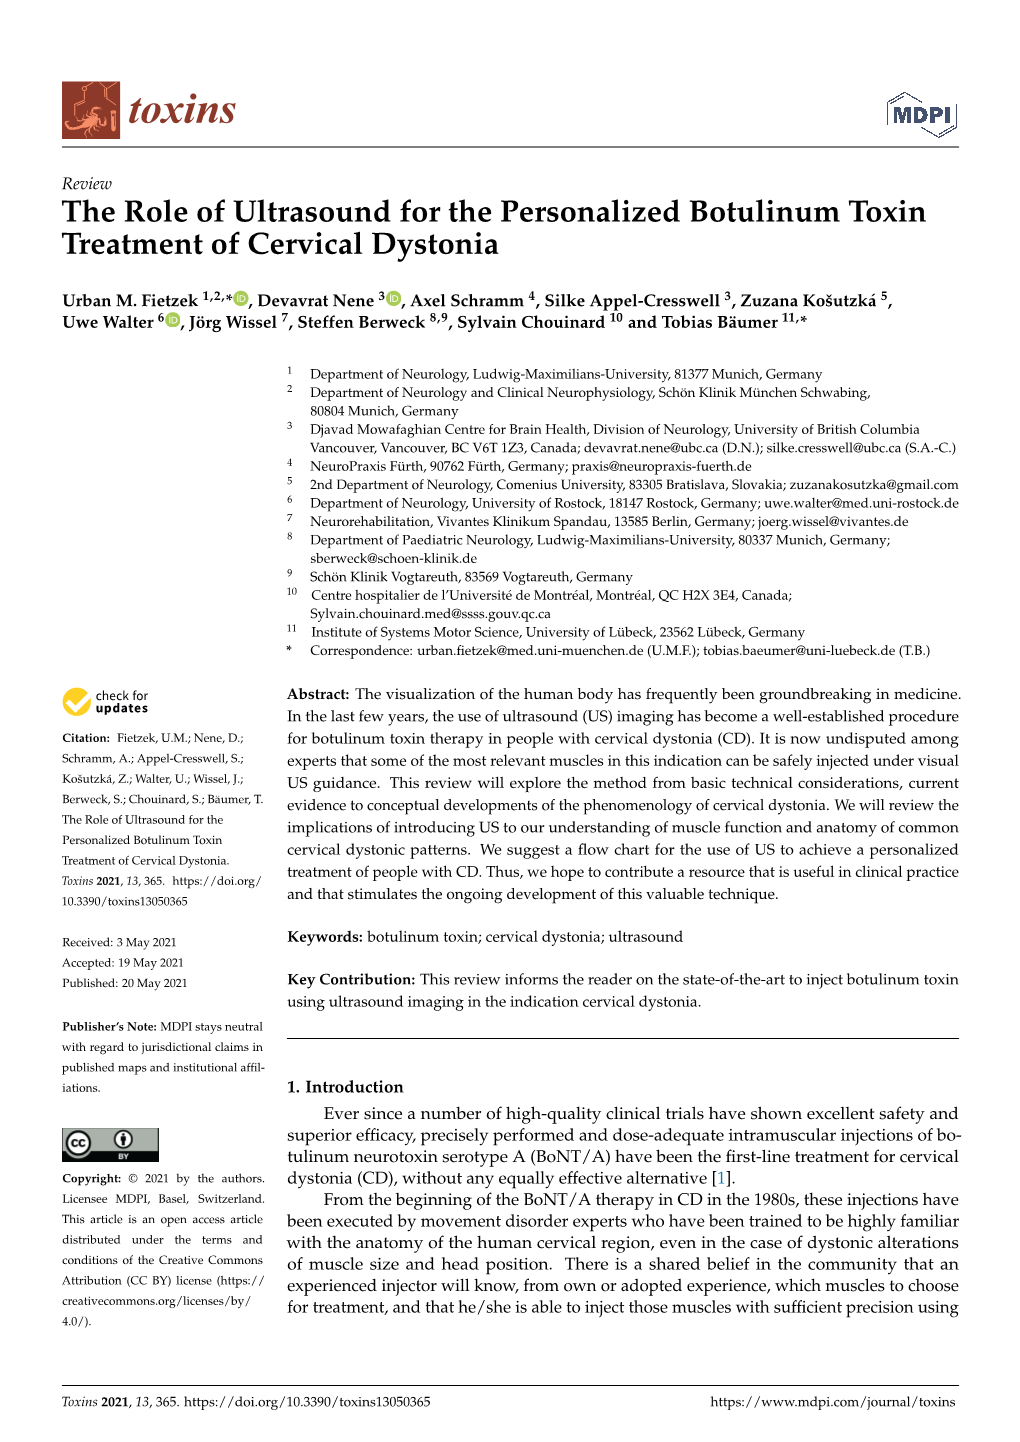 The Role of Ultrasound for the Personalized Botulinum Toxin Treatment of Cervical Dystonia